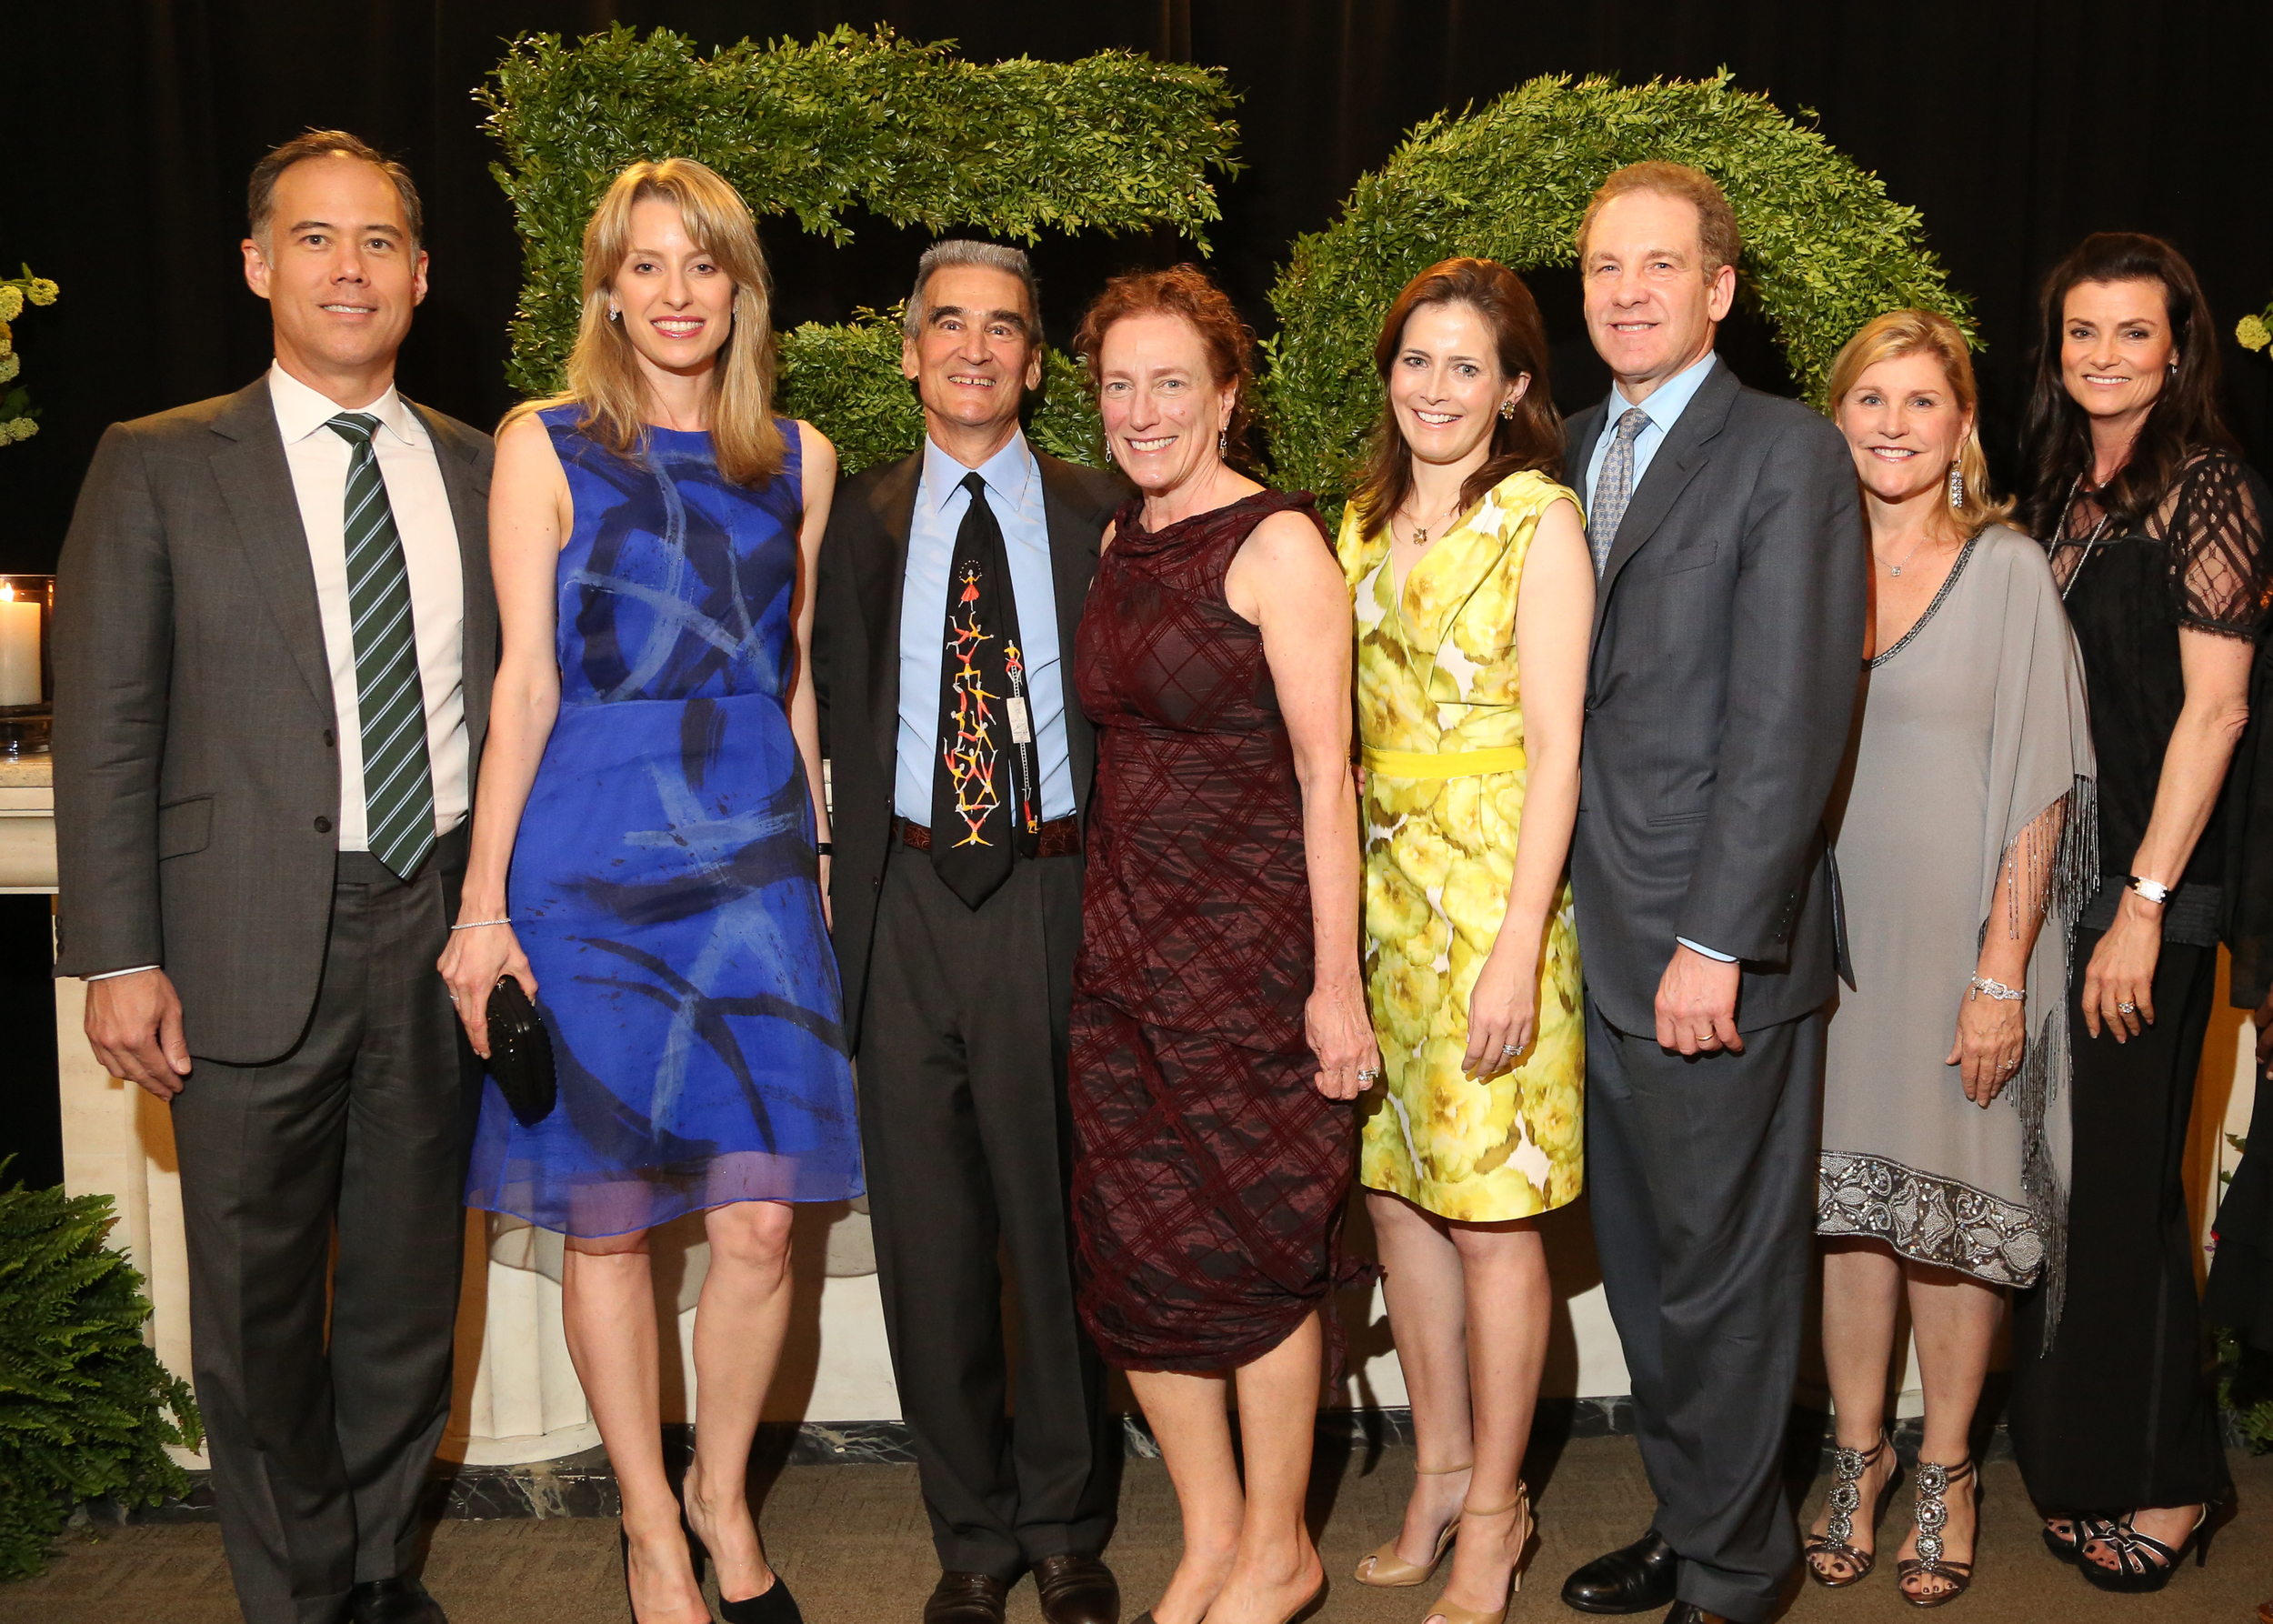 (From L-R) Event Chairmen Tom and Benan Ellis, Bud Shulman and Amy Newman, Joyce and Robert Giuffra, Susan R. Kessler, and Liz Armstrong.jpg